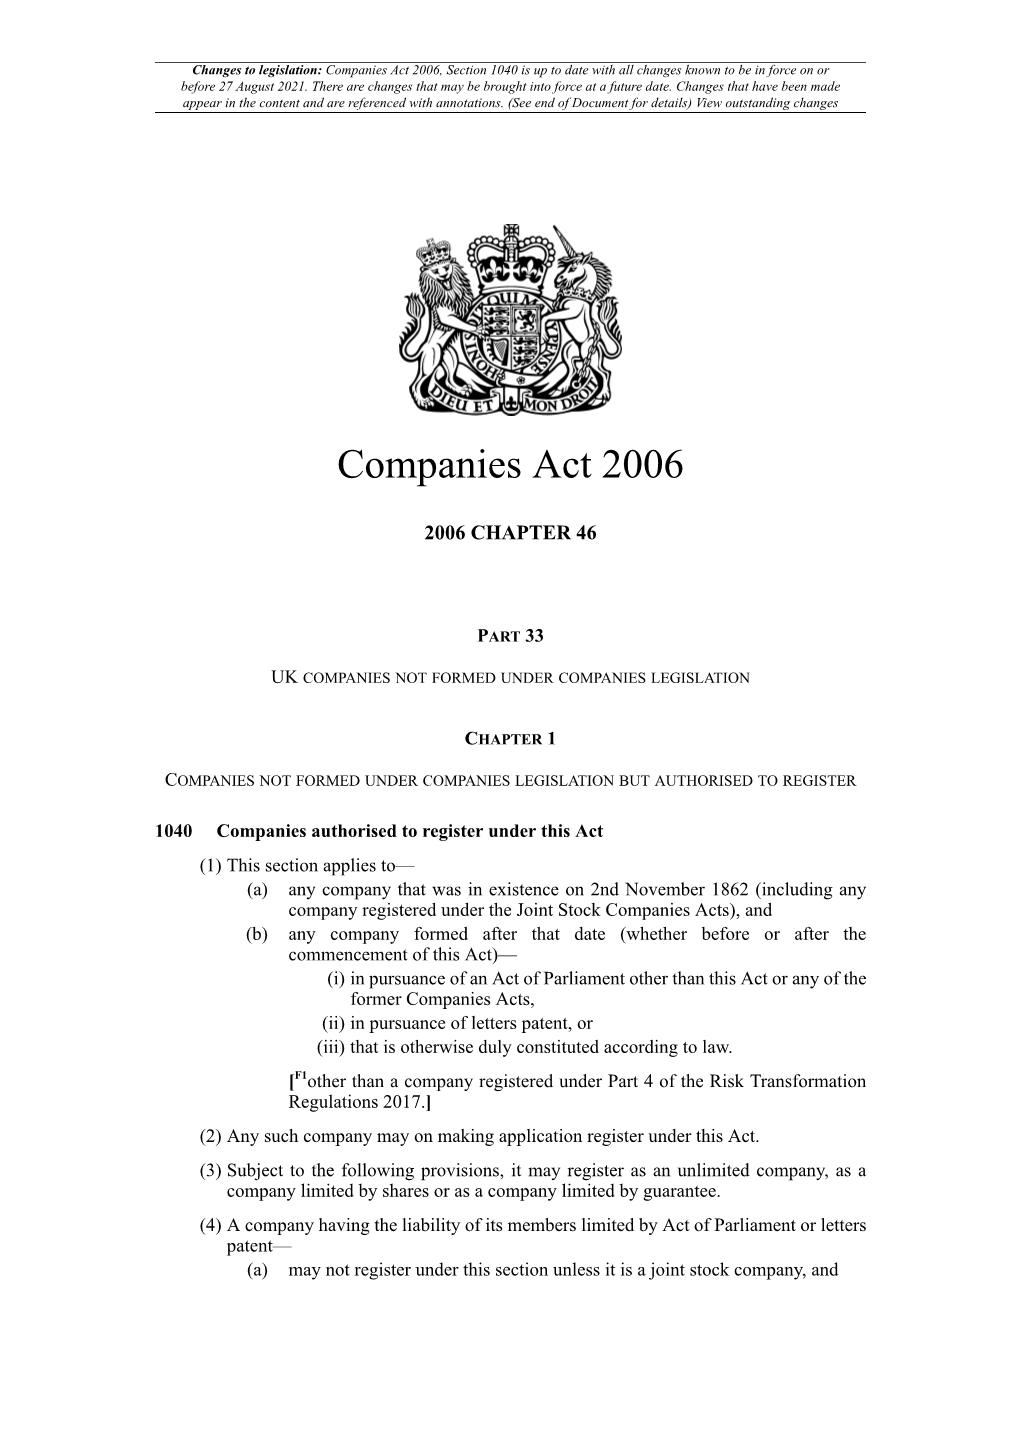 Companies Act 2006, Section 1040 Is up to Date with All Changes Known to Be in Force on Or Before 27 August 2021